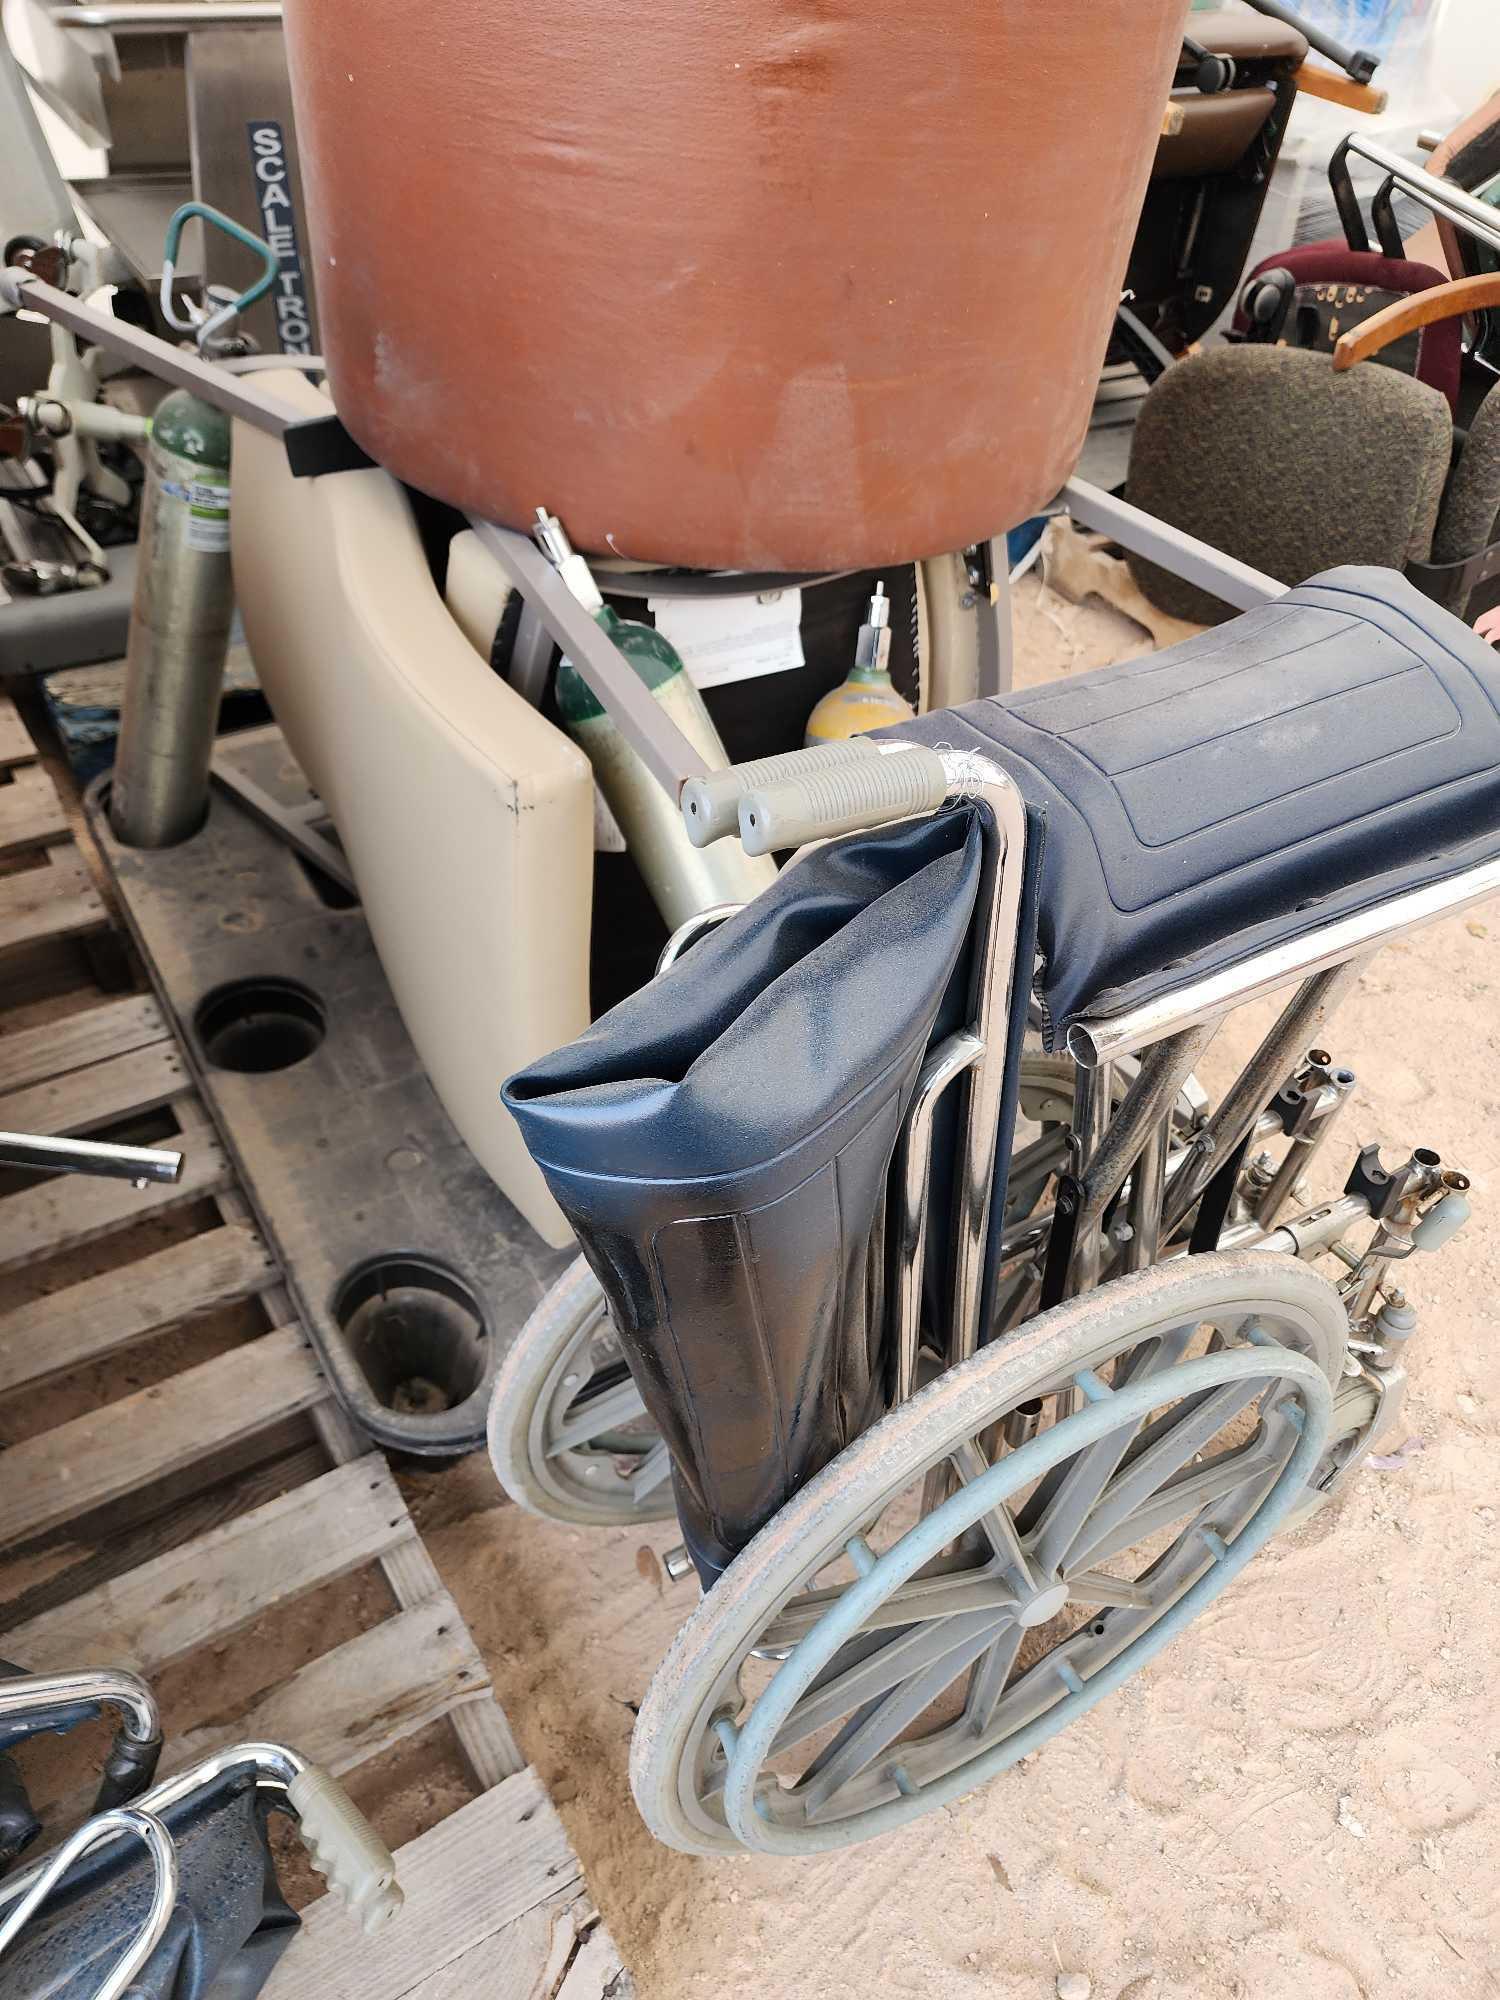 (1) Scale Tronix, (1) Wheel Chair, (2) Cushion Chairs, (4) Medical Oxygen Tanks, Misc.